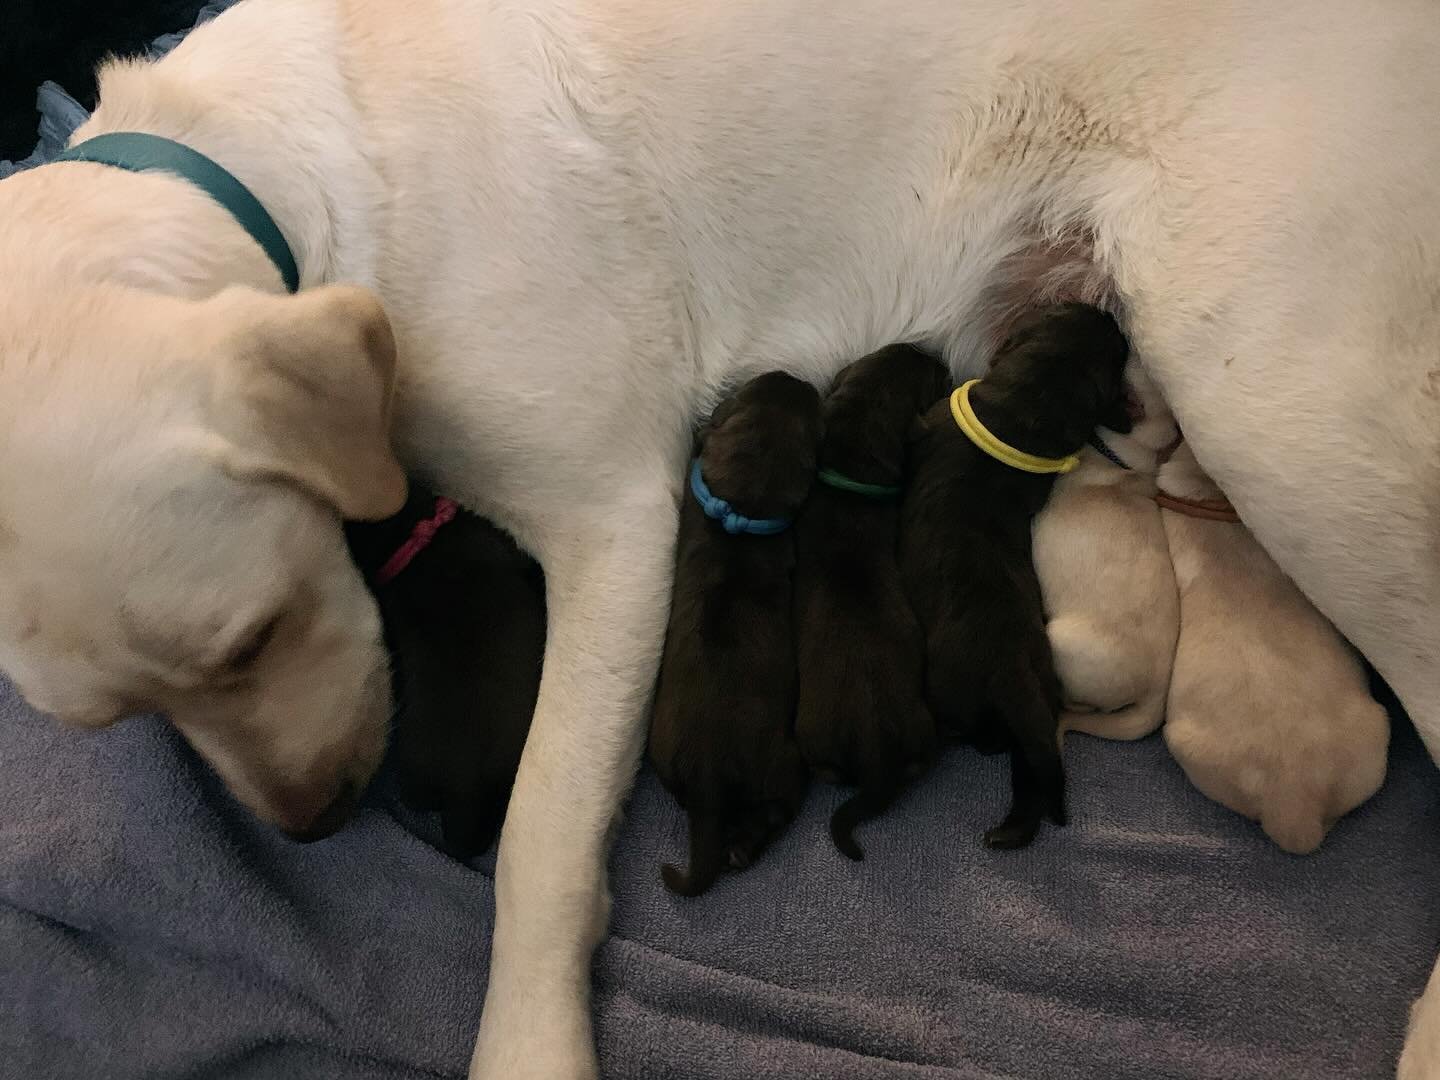 Beautiful miss Ellie Jelly Cup has welcomed 6 perfect little baby &ldquo;cuppies&rdquo; into the world last night ! 🥰🥰🥰 Everyone doing really well and Ellie is enjoying a well-earned rest with her new charges 🥰 

At this stage, I believe all of t